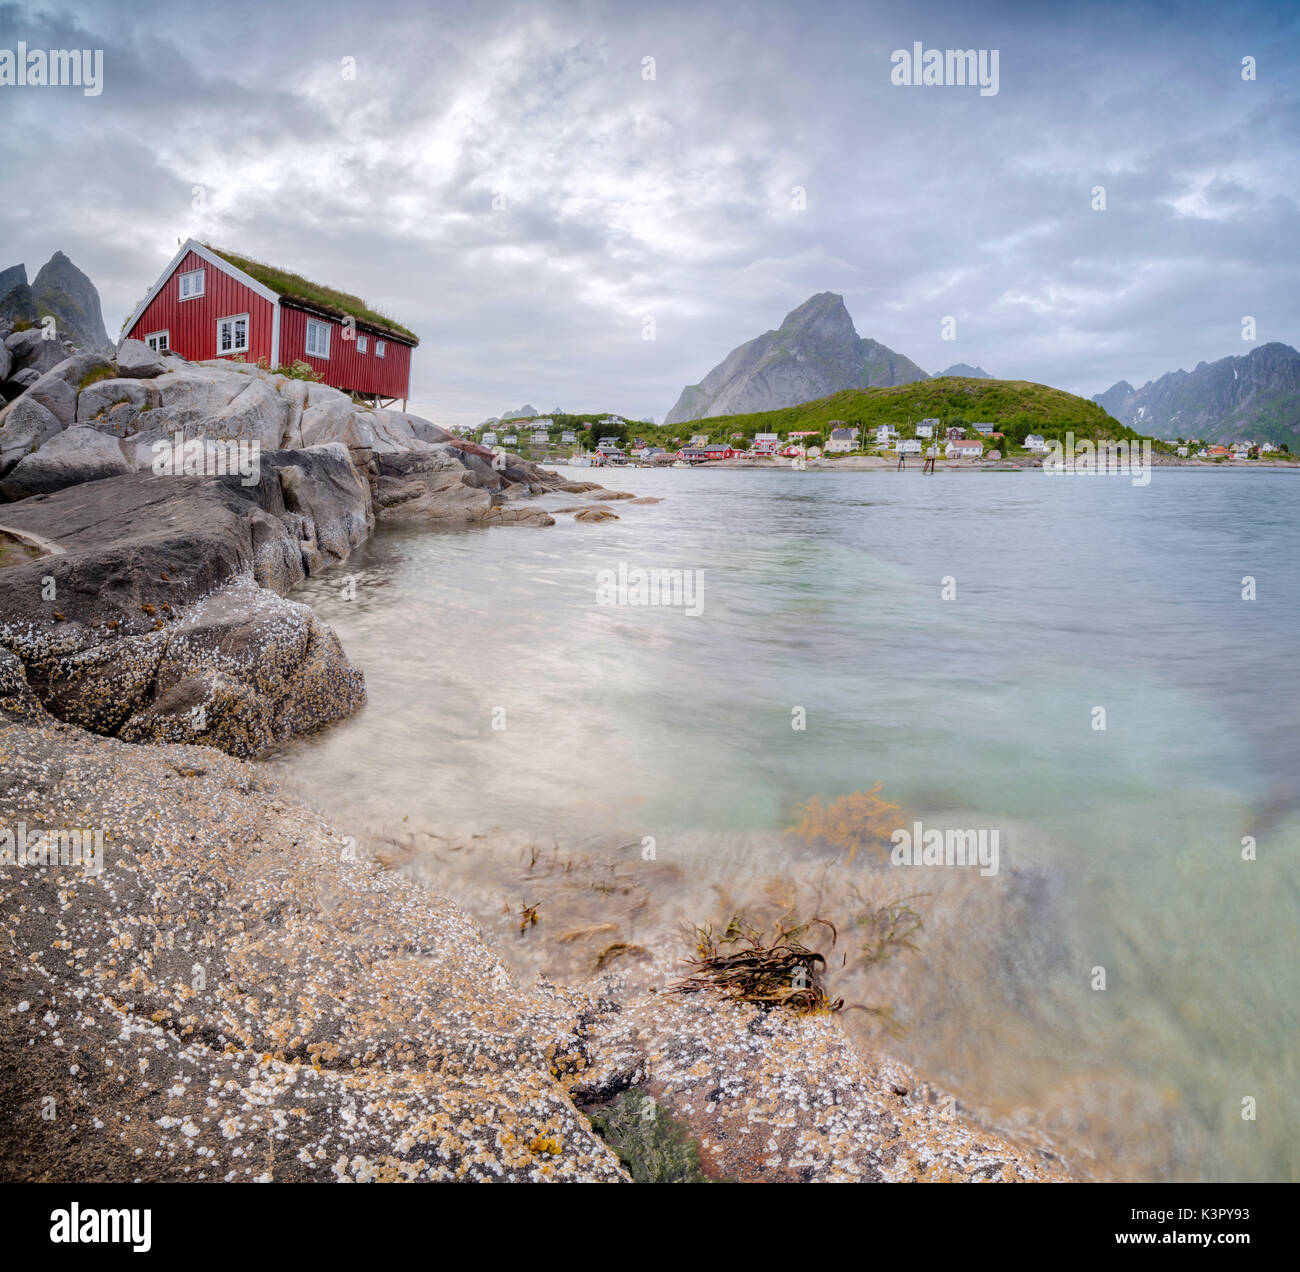 Panoramic of the typical Rorbu surrounded by peaks and clear sea Reine Nordland county Lofoten Islands Northern Norway Europe Stock Photo